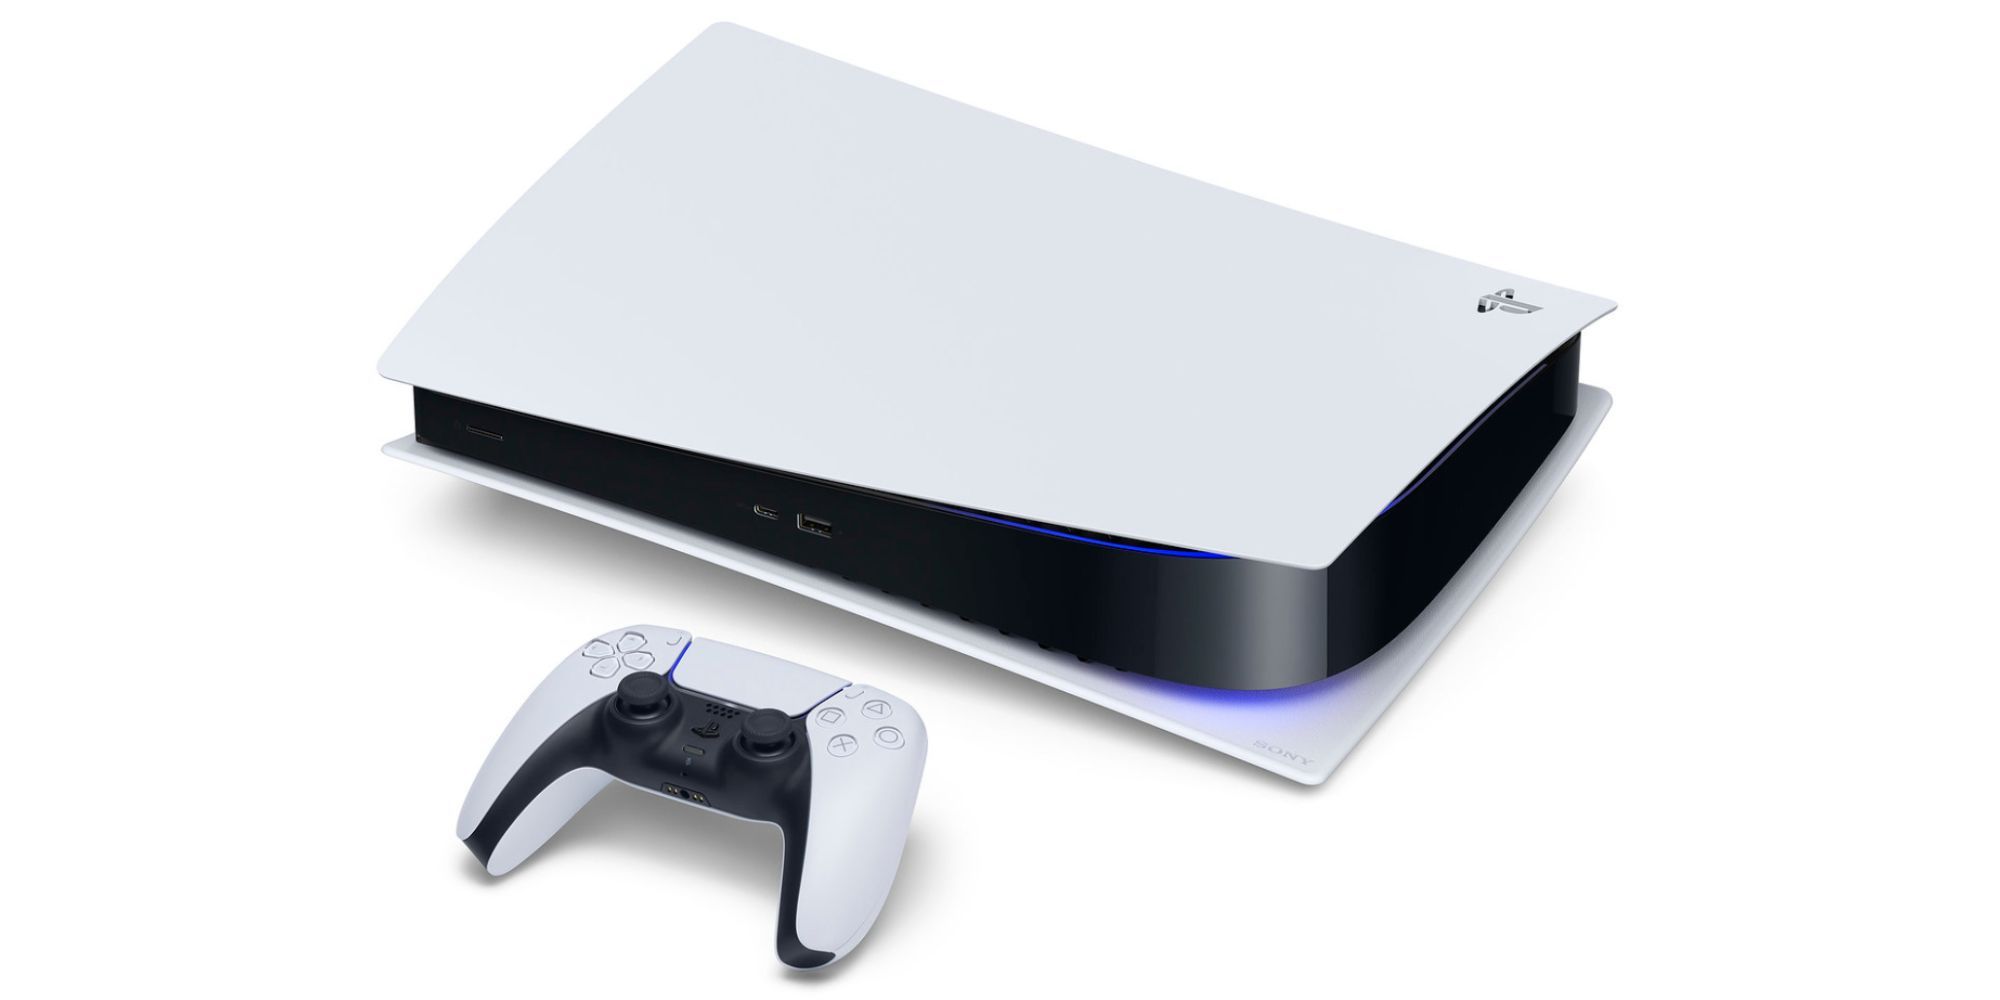 EXCLUSIVE - PS5 Pro in Development, Could Release Late 2024